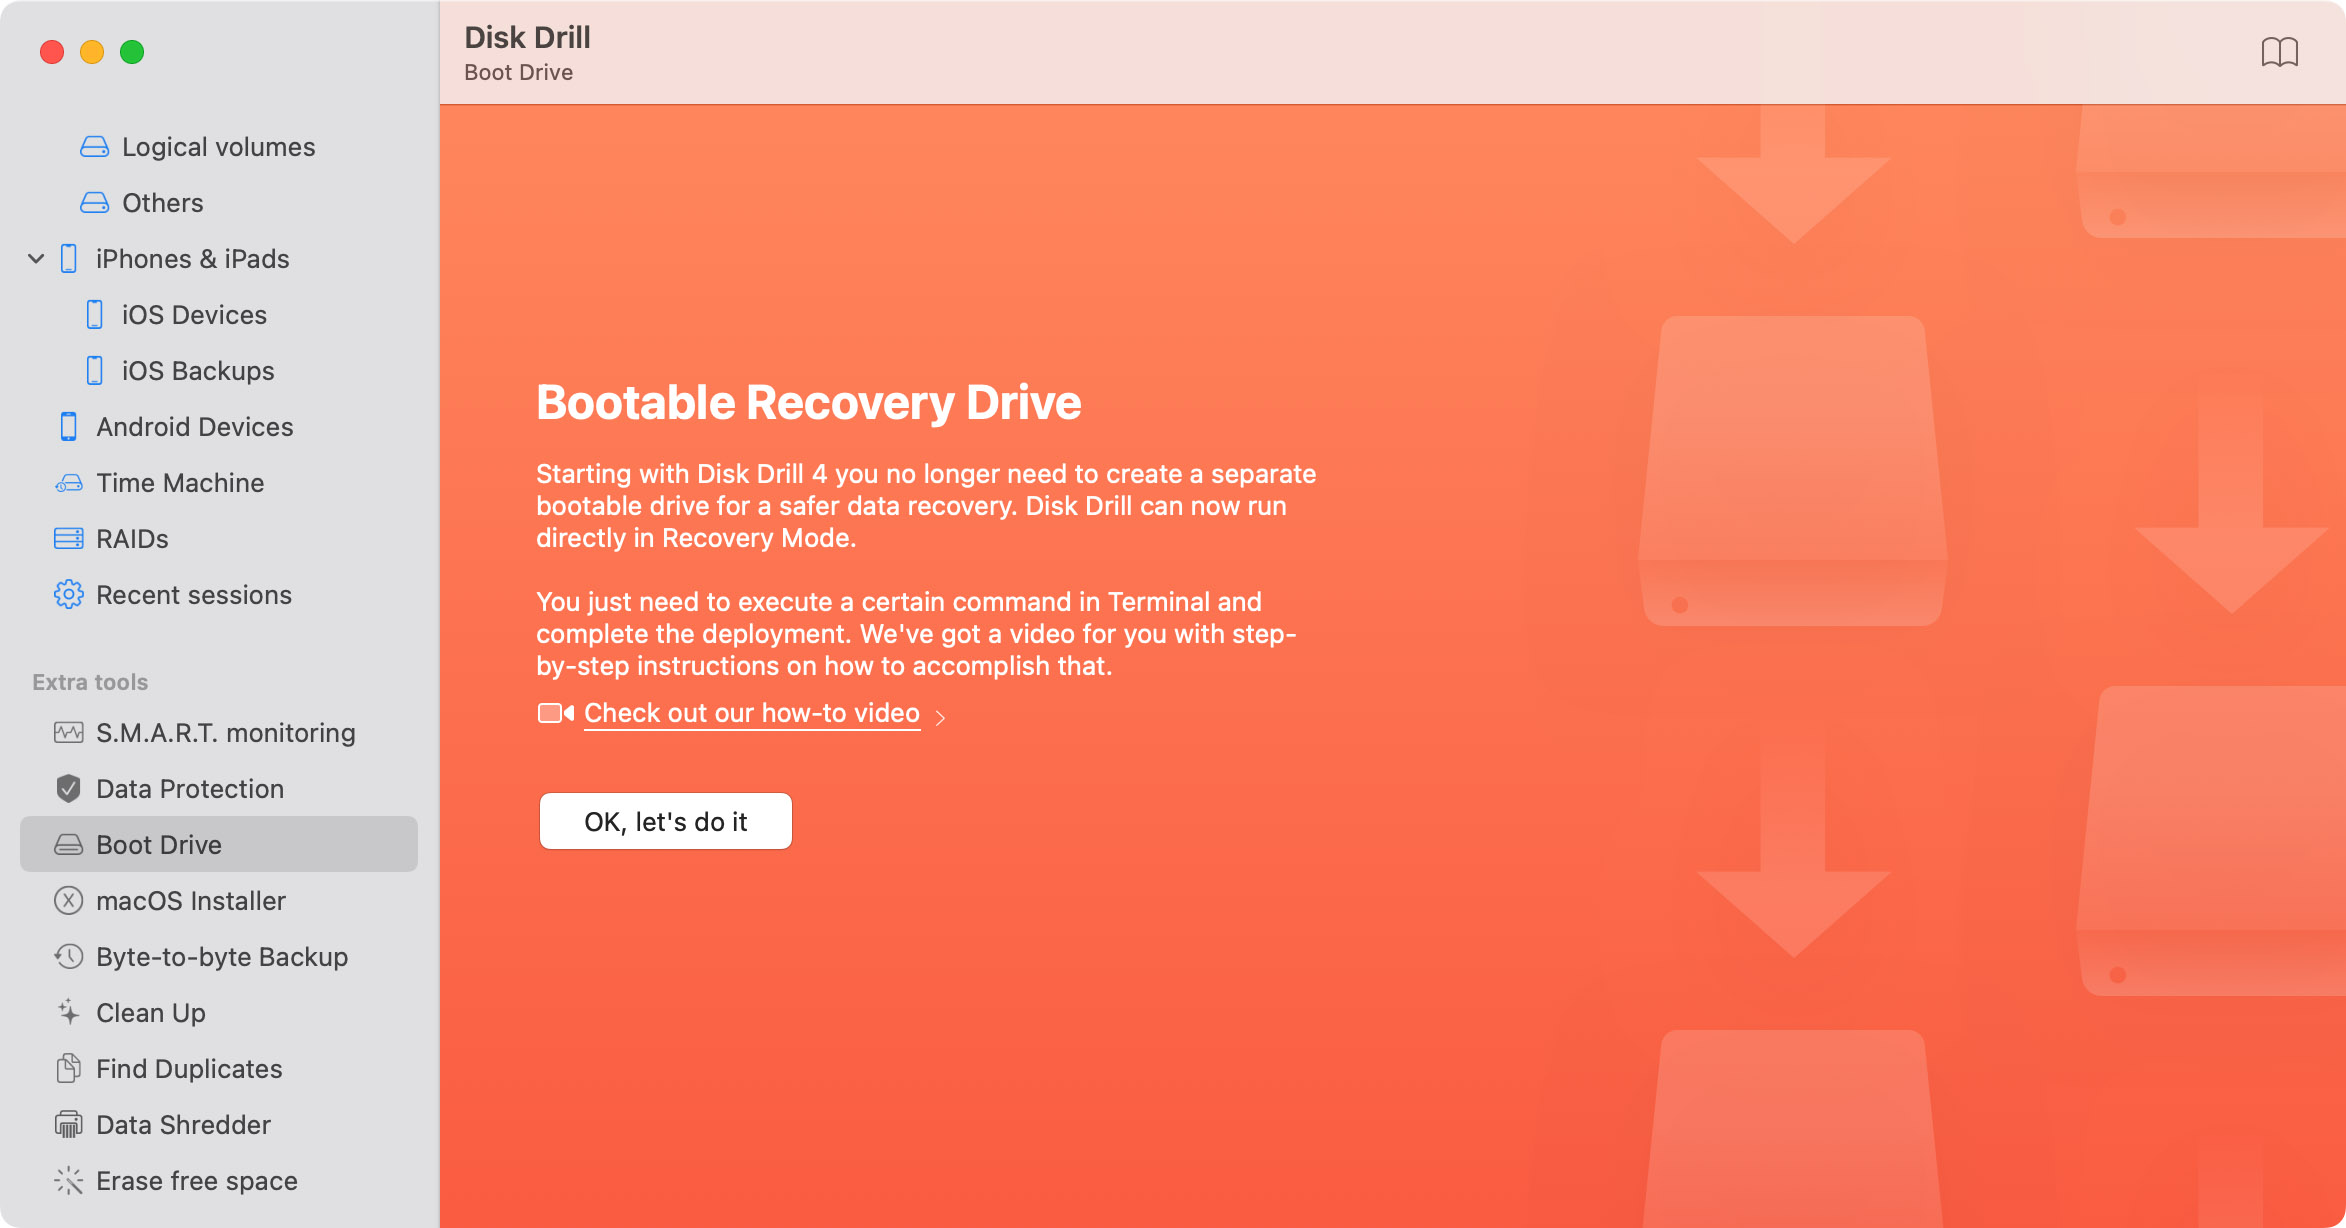 Recovering from your system (root) drive